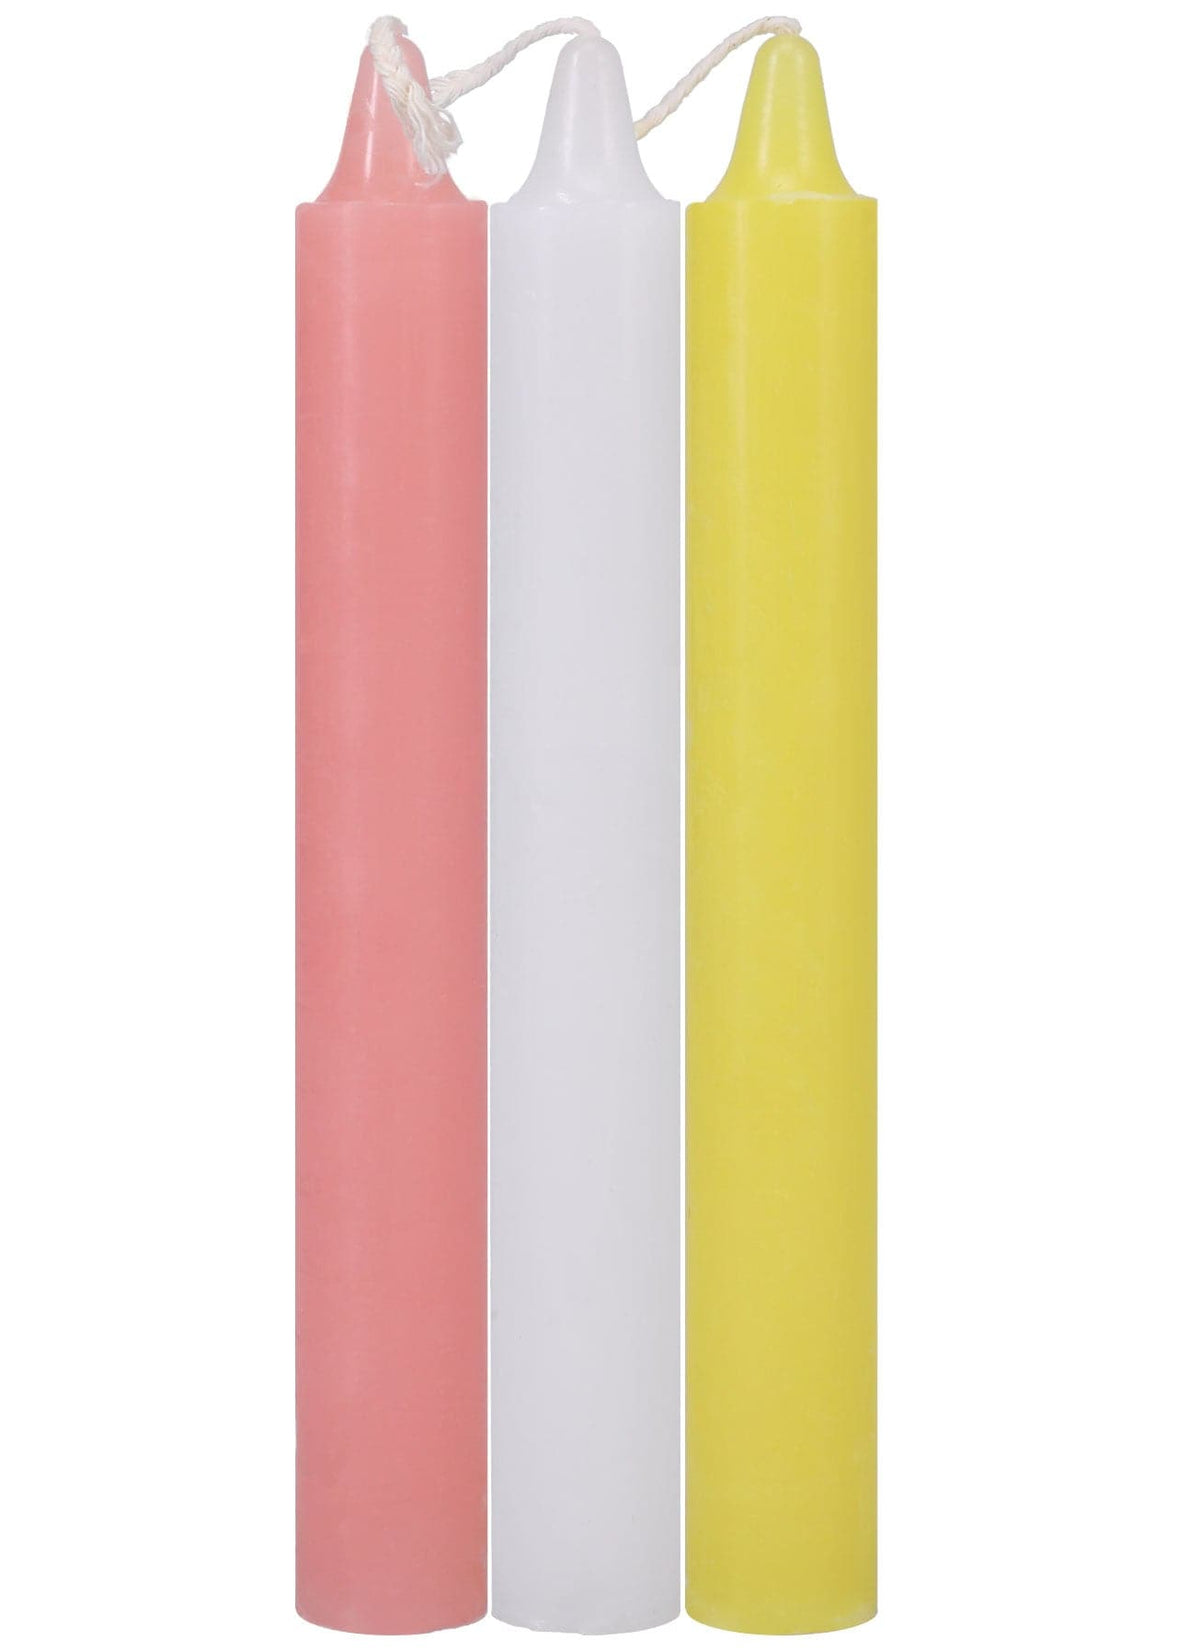 japanese drip candles 3 pack pink white yellow